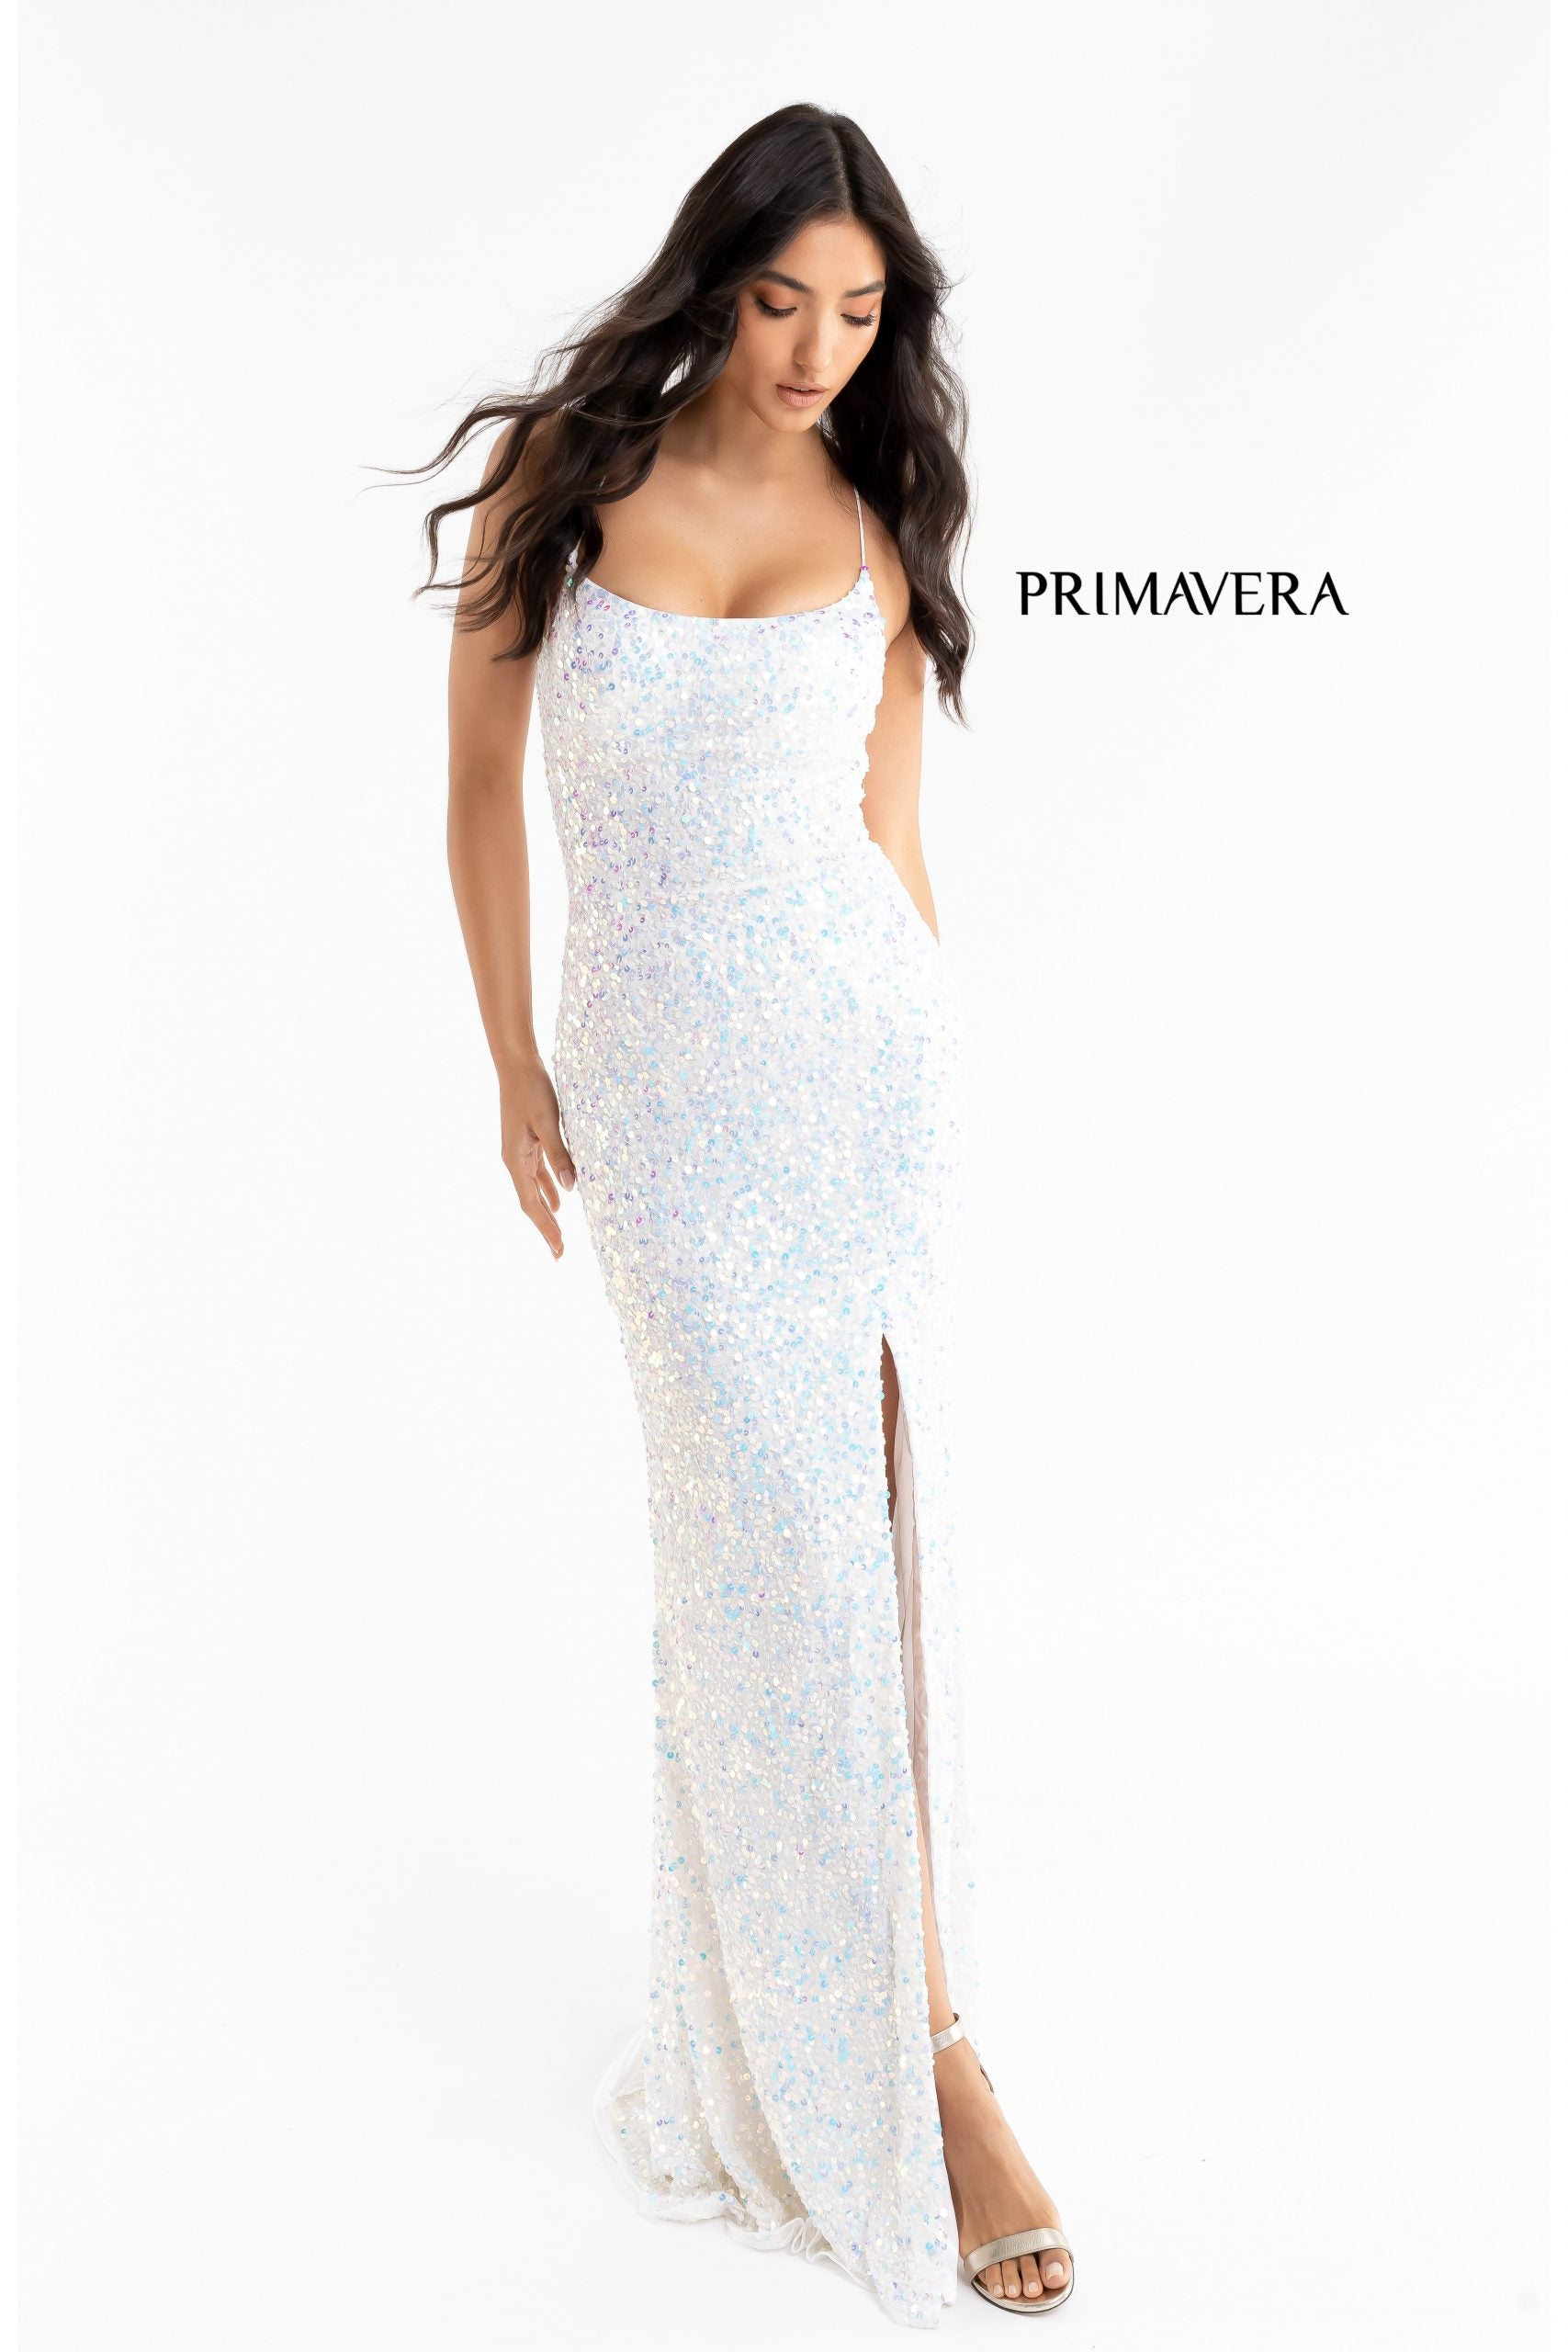 Primavera Couture 3290 This prom dress adds a pop to the multi sequins dress.  With a scoop neckline and spaghetti straps that cross and tie in the back.  This long evening dress has a side slit.  Available sizes:  000, 00, 0, 2, 4, 6, 8, 10, 12, 14, 16